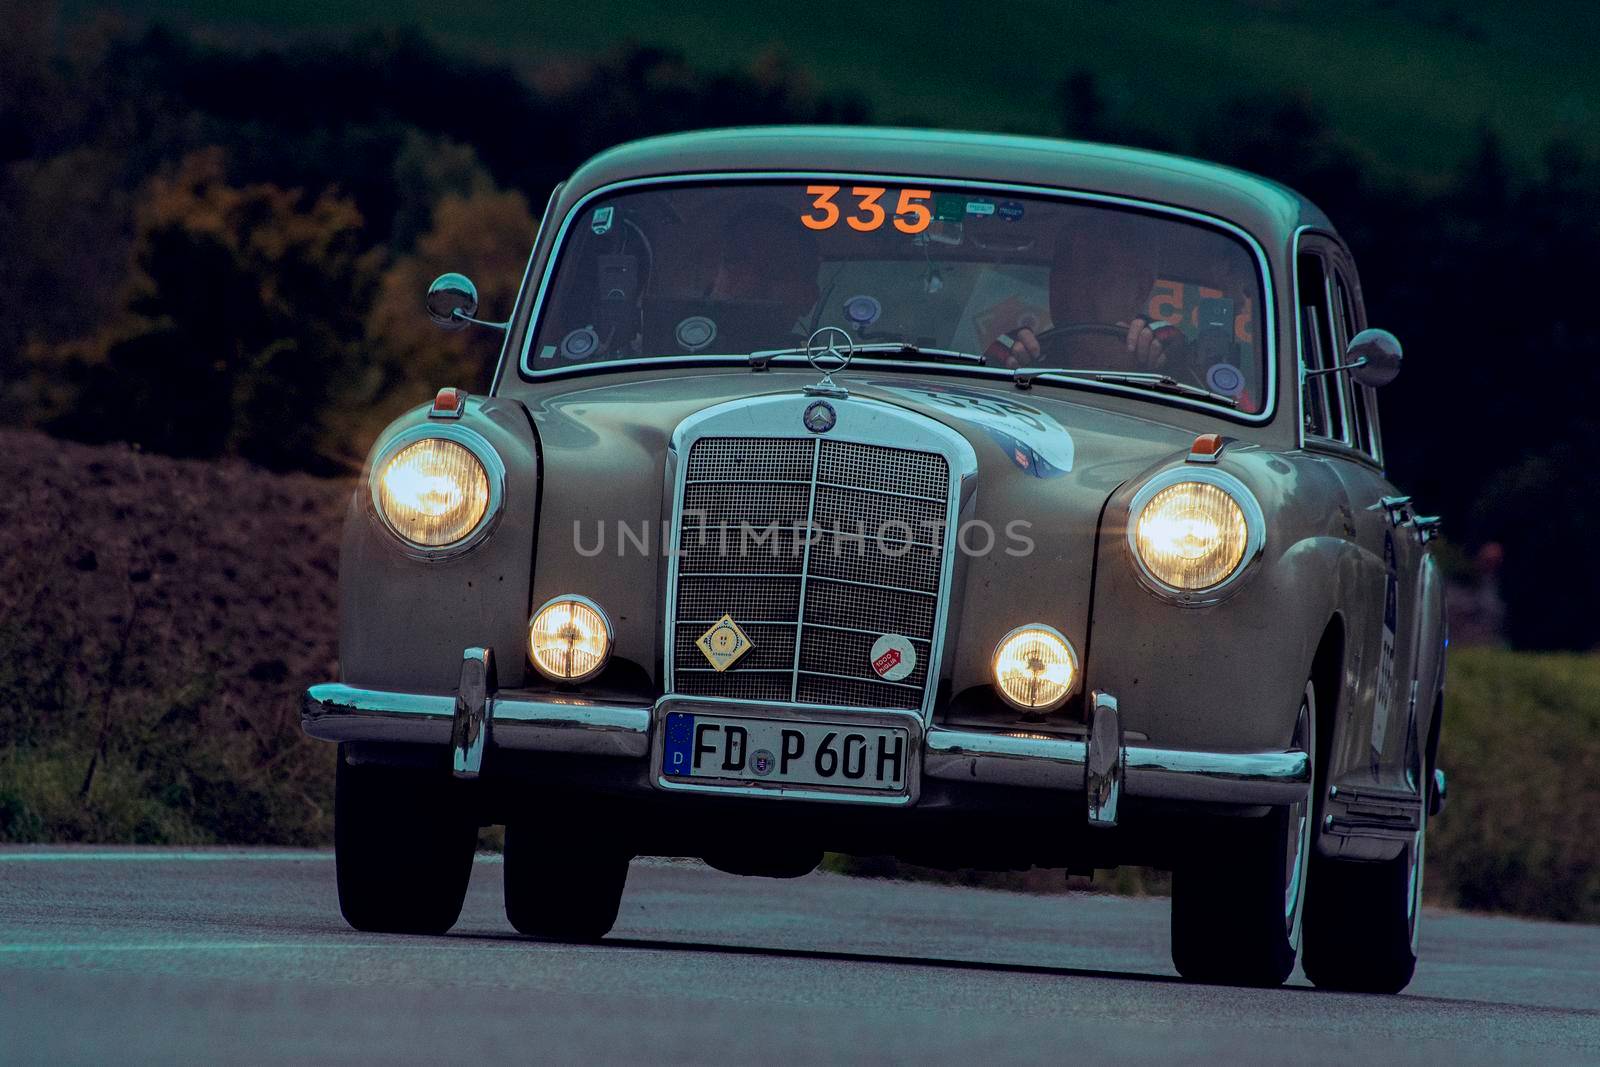 MERCEDES-BENZ 220 A 1955 an old racing car in rally Mille Miglia 2020 the famous italian historical race (1927-1957) by massimocampanari